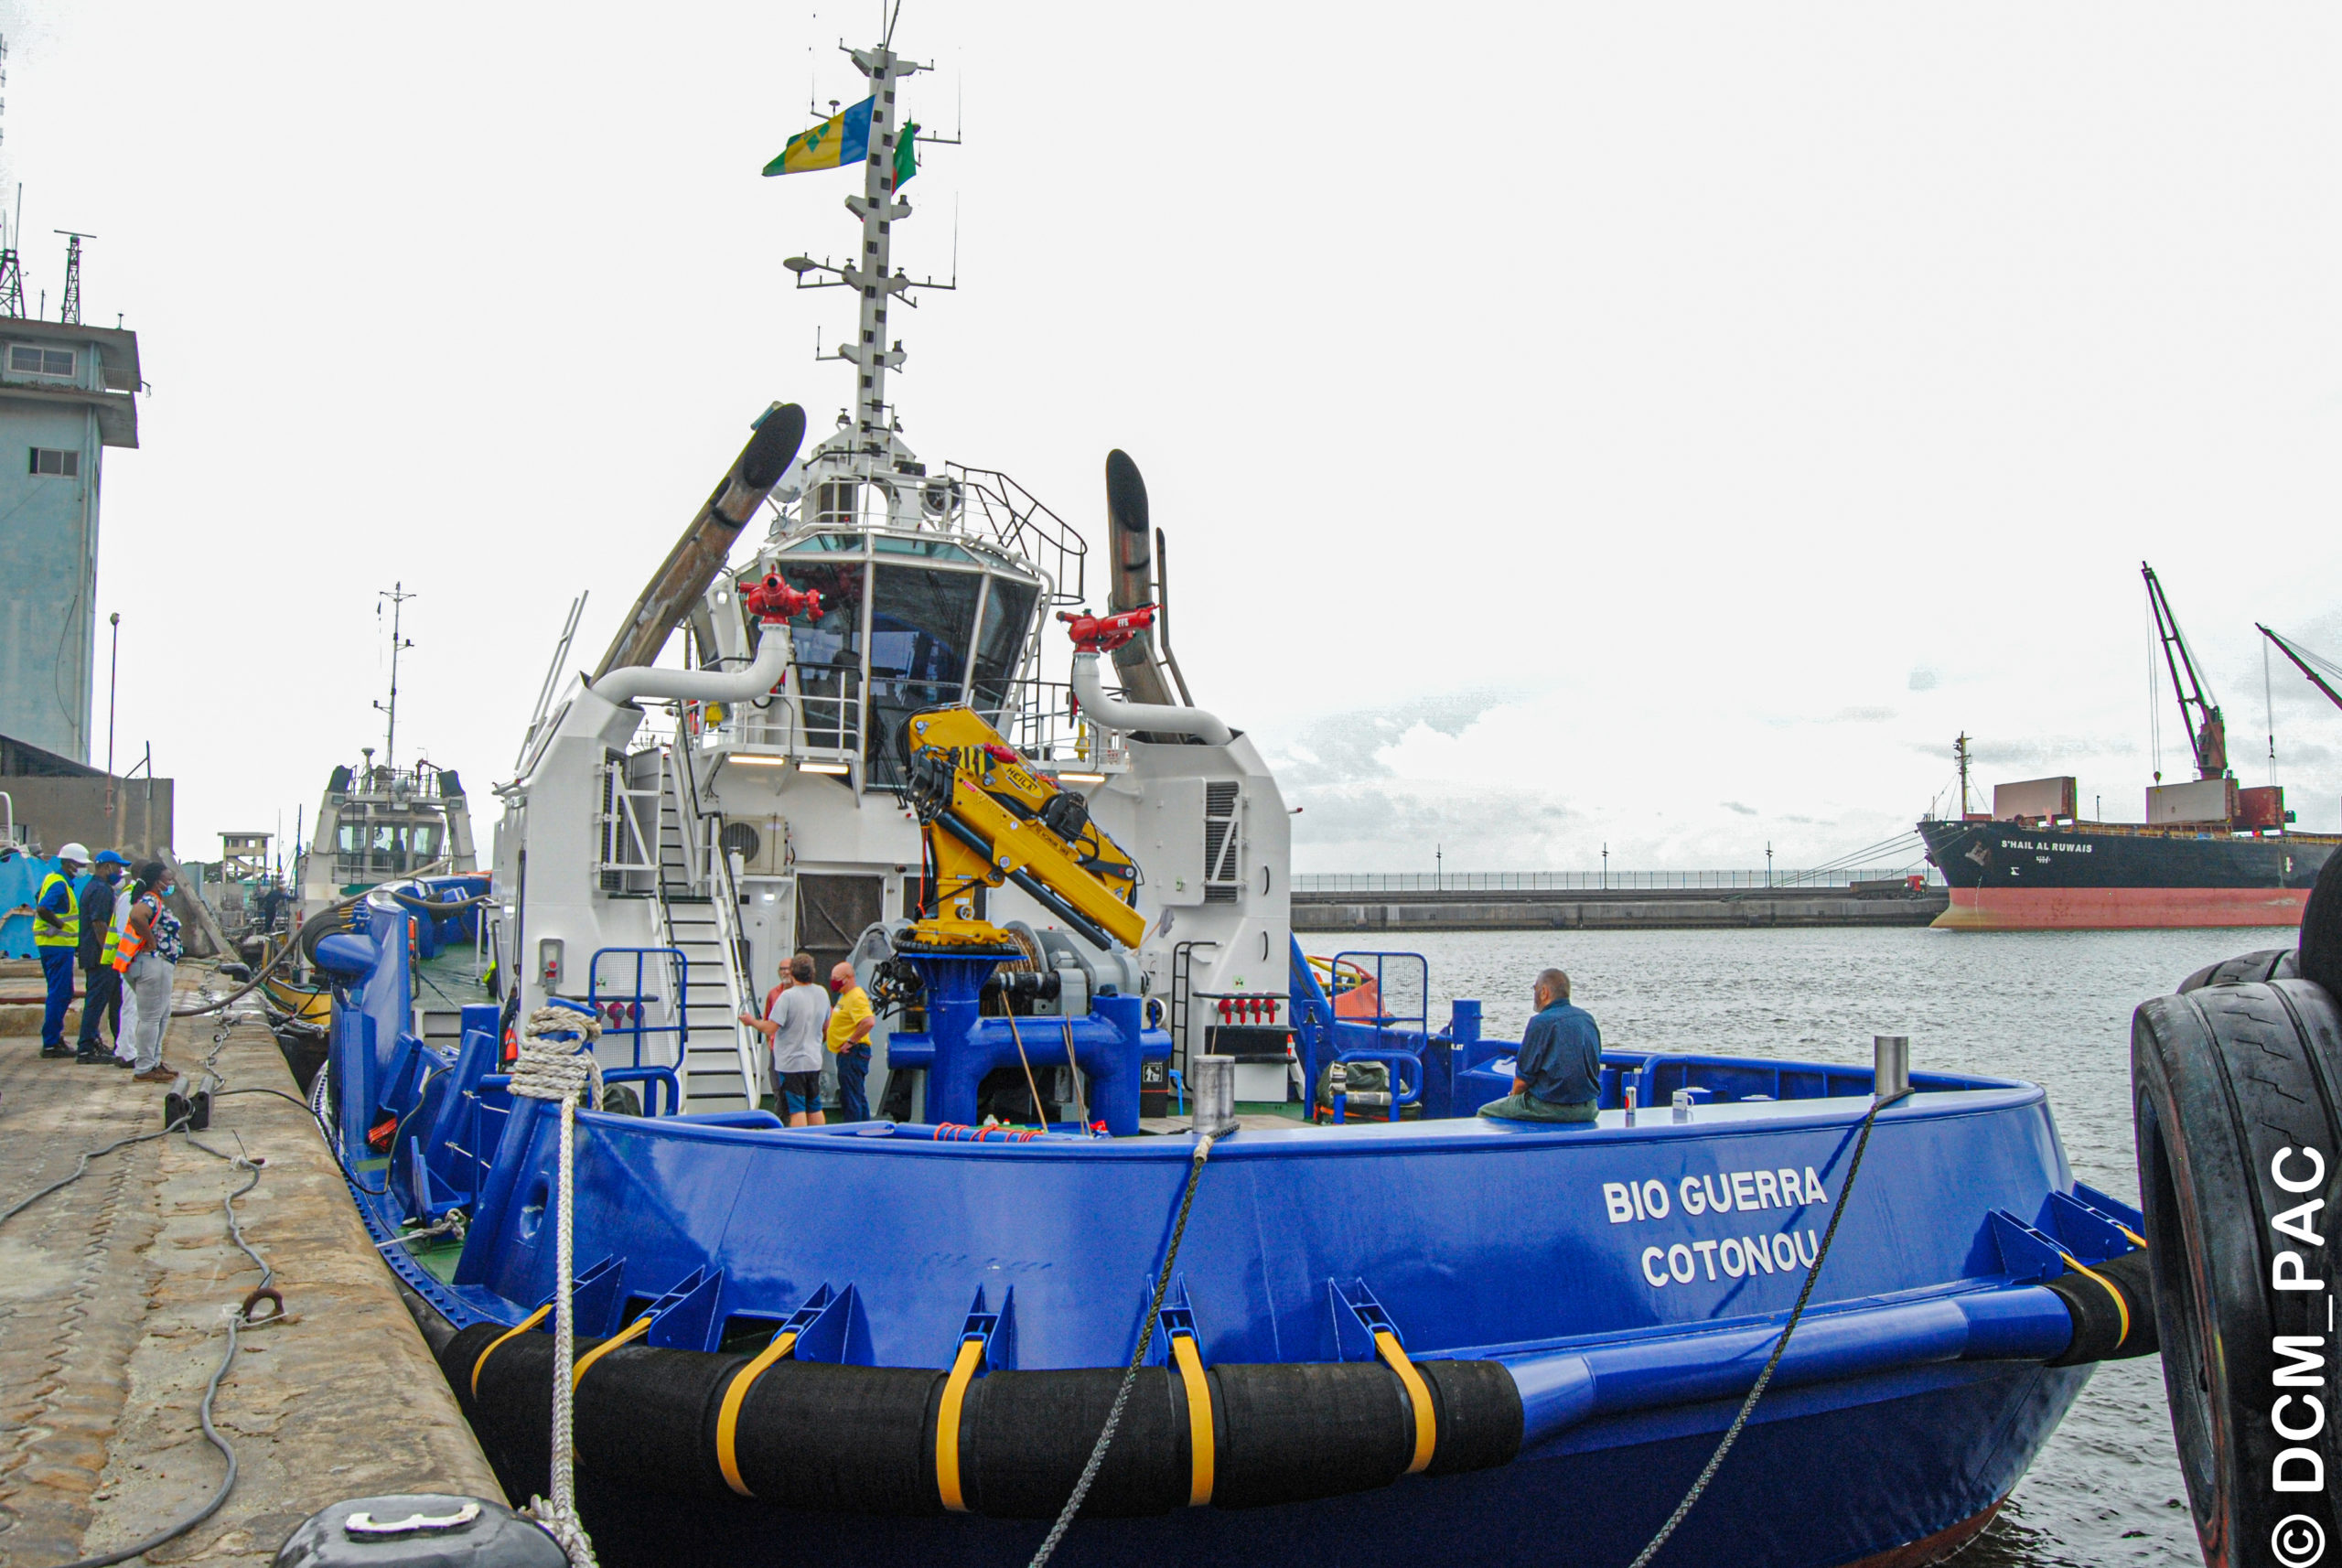 Modernization and reinforcement of equipment at the Port of Cotonou: The 2nd tug, BIO GUERRA, has arrived